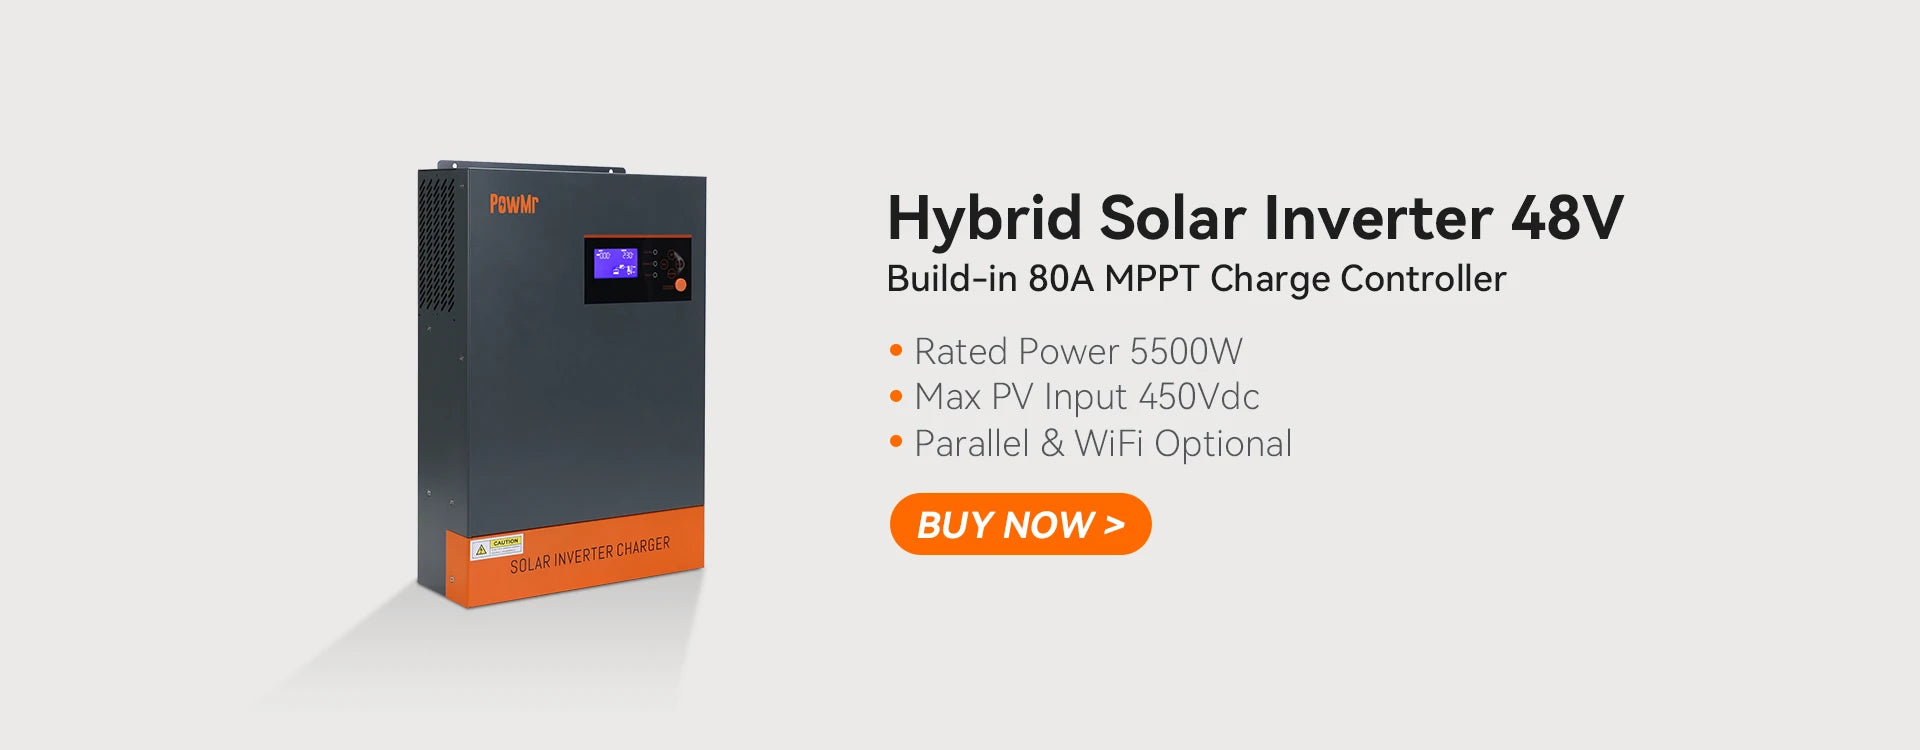 PowMr Solar Inverter, Hybrid solar inverter with 48V, 30A rating, 5500W power, and WiFi option for remote monitoring.